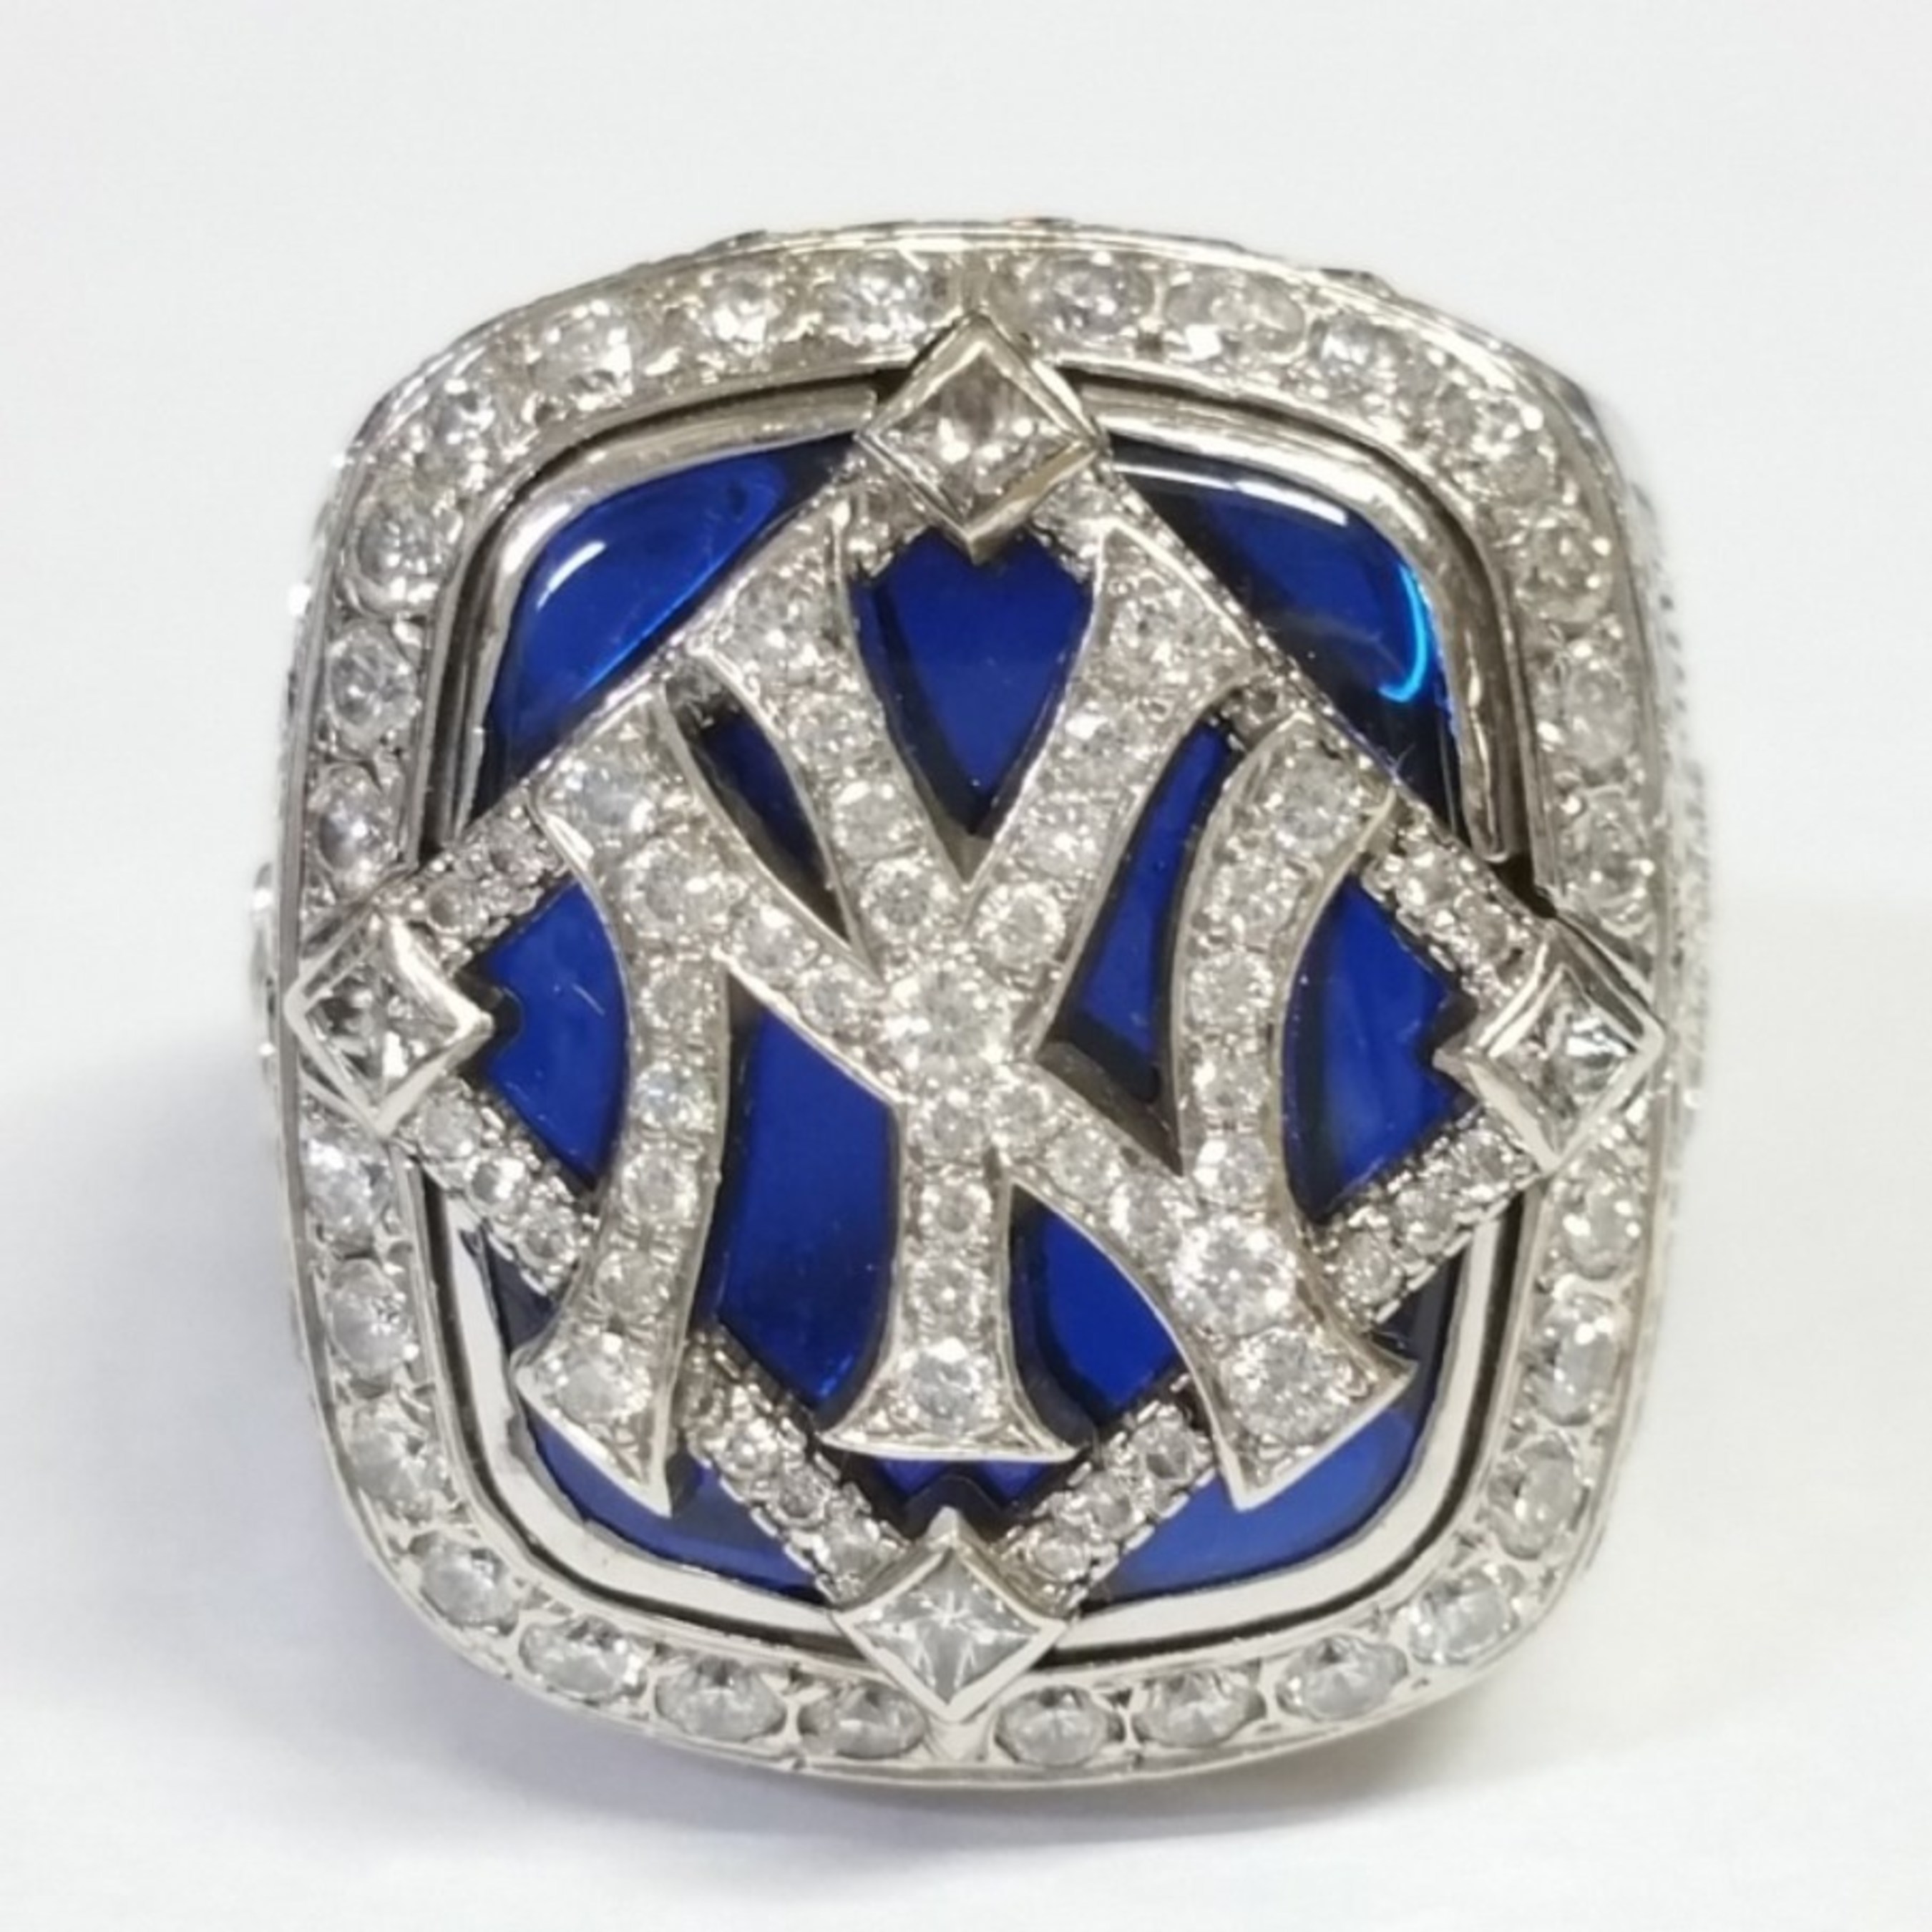 1996, 1998, 2000 and 7 other Yankees rings on auction this Wednesday